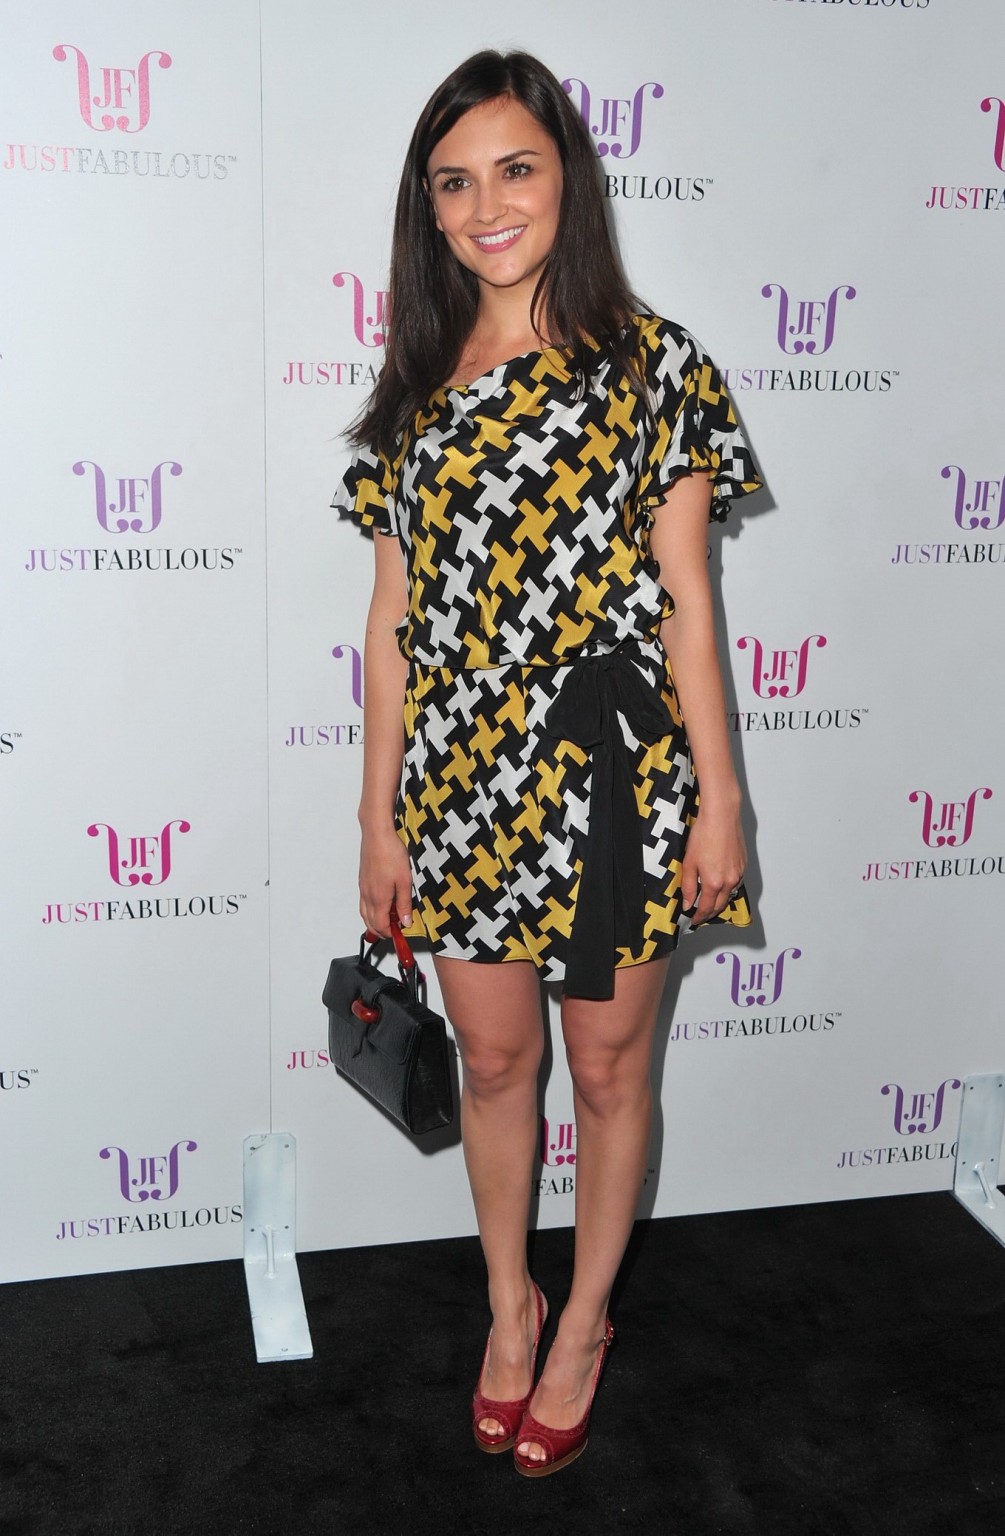 Rachael leigh cook leggy wearing mini dress at justfabulous launch party in west
 #75309243